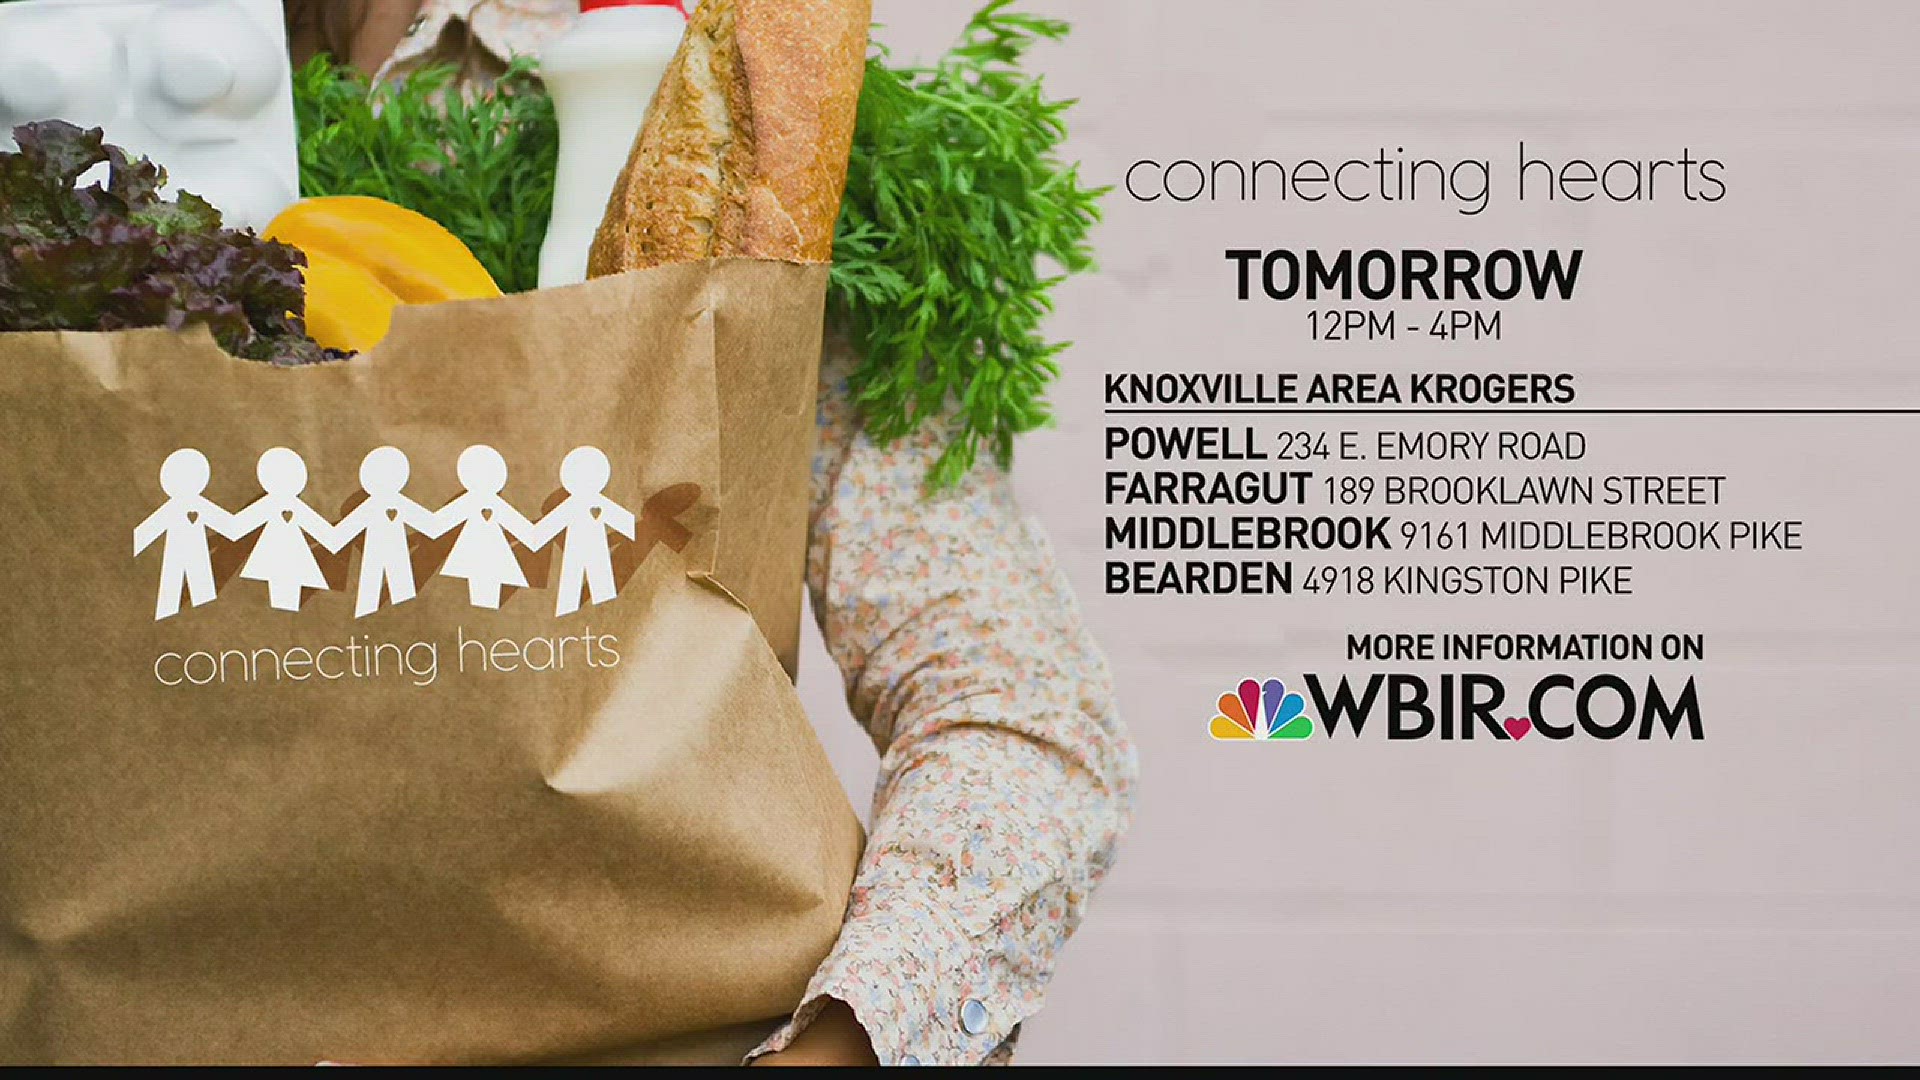 Members of WBIR Channel 10 will collect food and sign up volunteers for our Connecting Hearts program on October 14 at area Krogers (from Noon to 4pm)